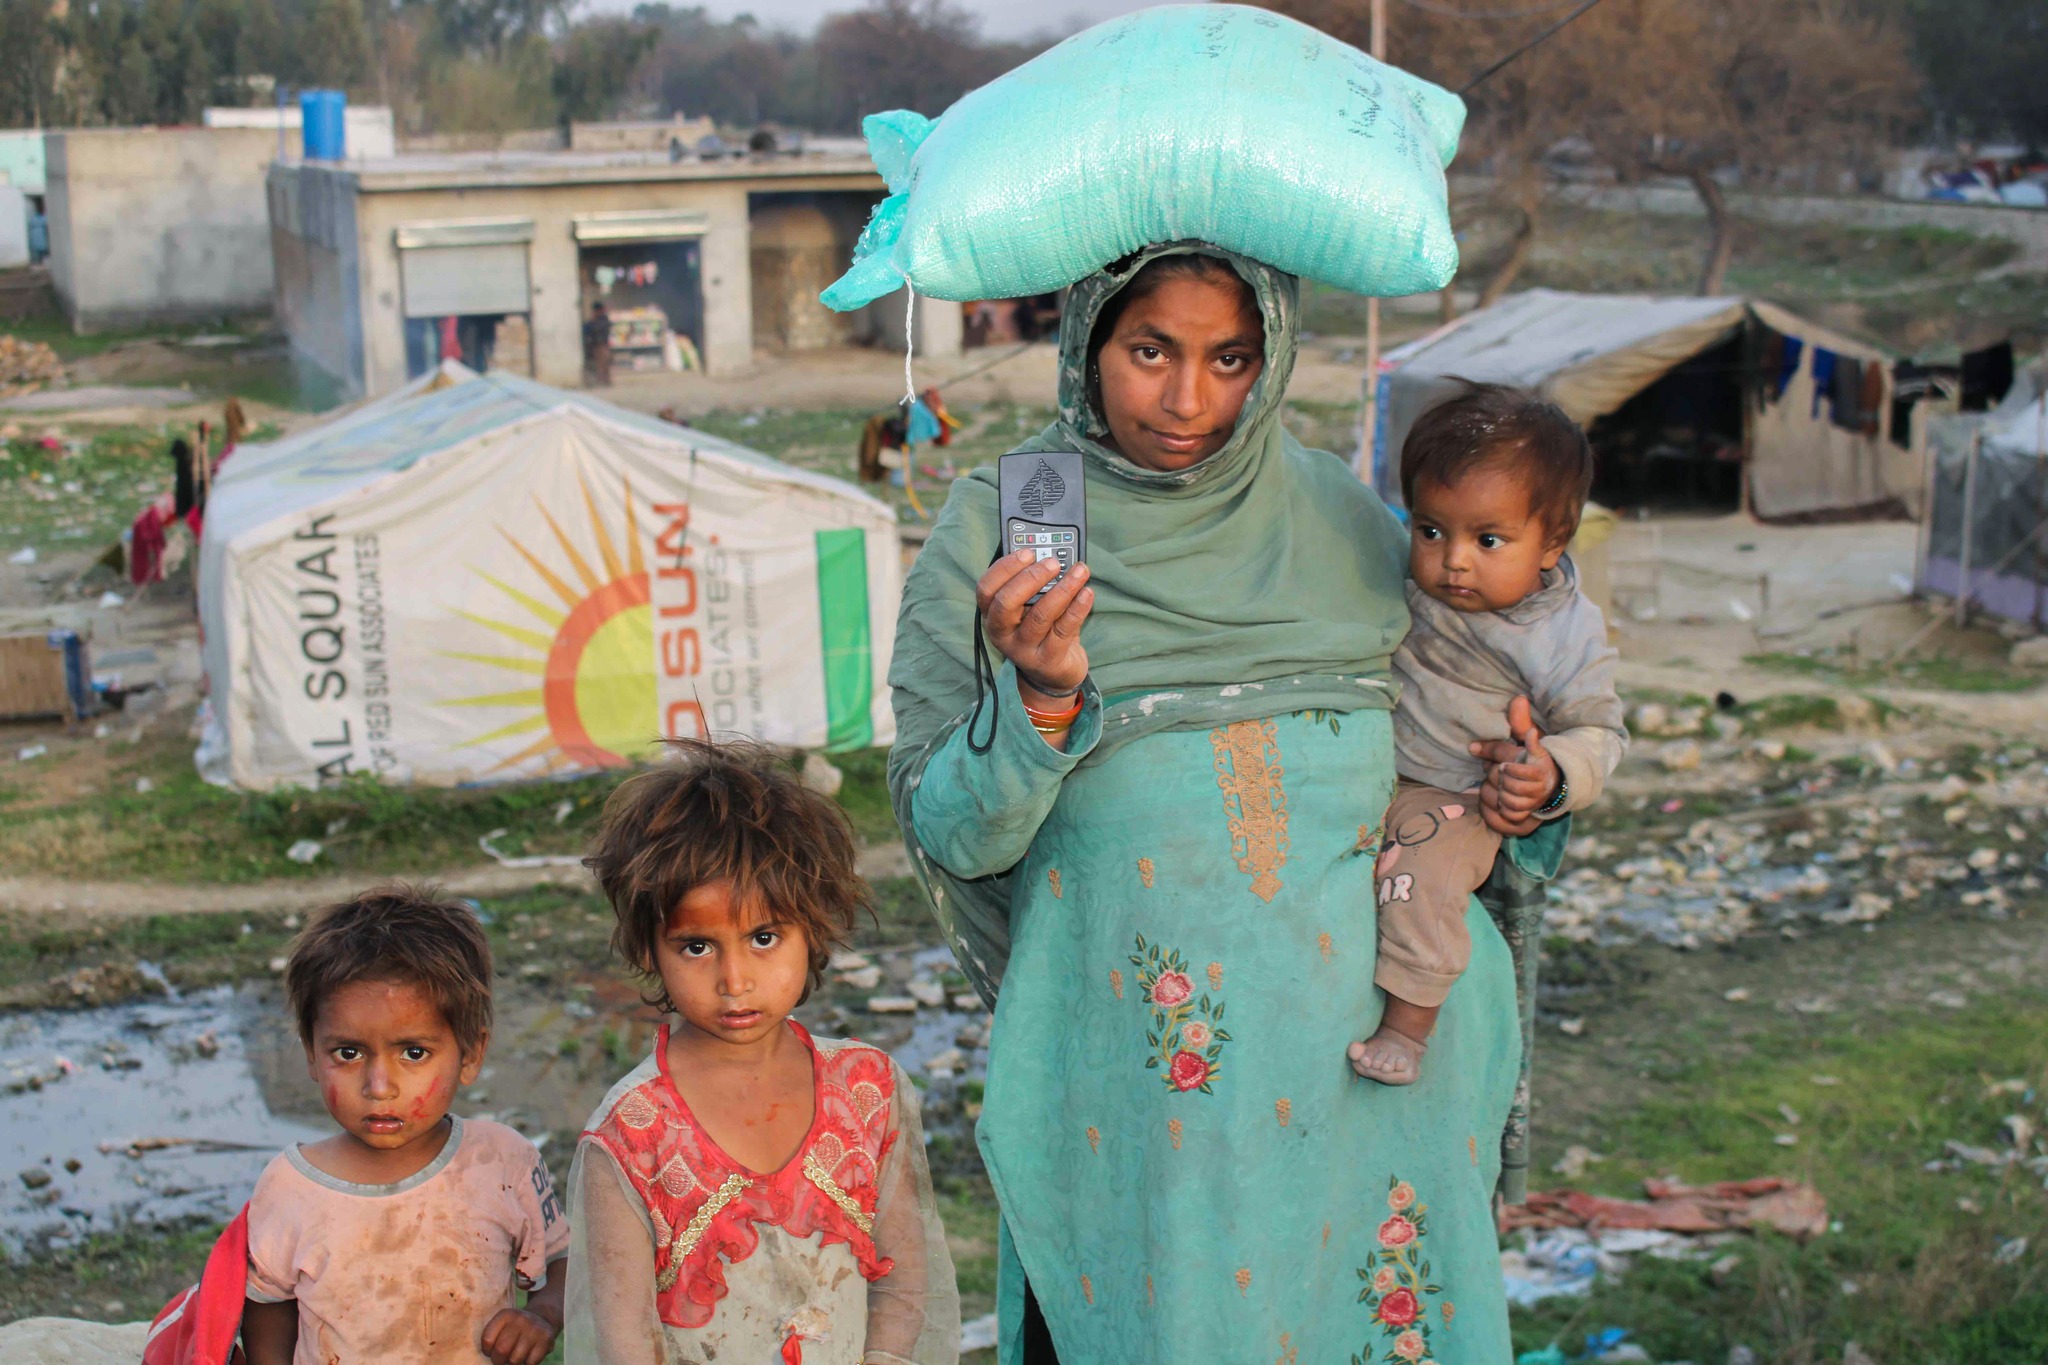 World Mission Rescues Afghan Refugees, Displaced People from Traffickers